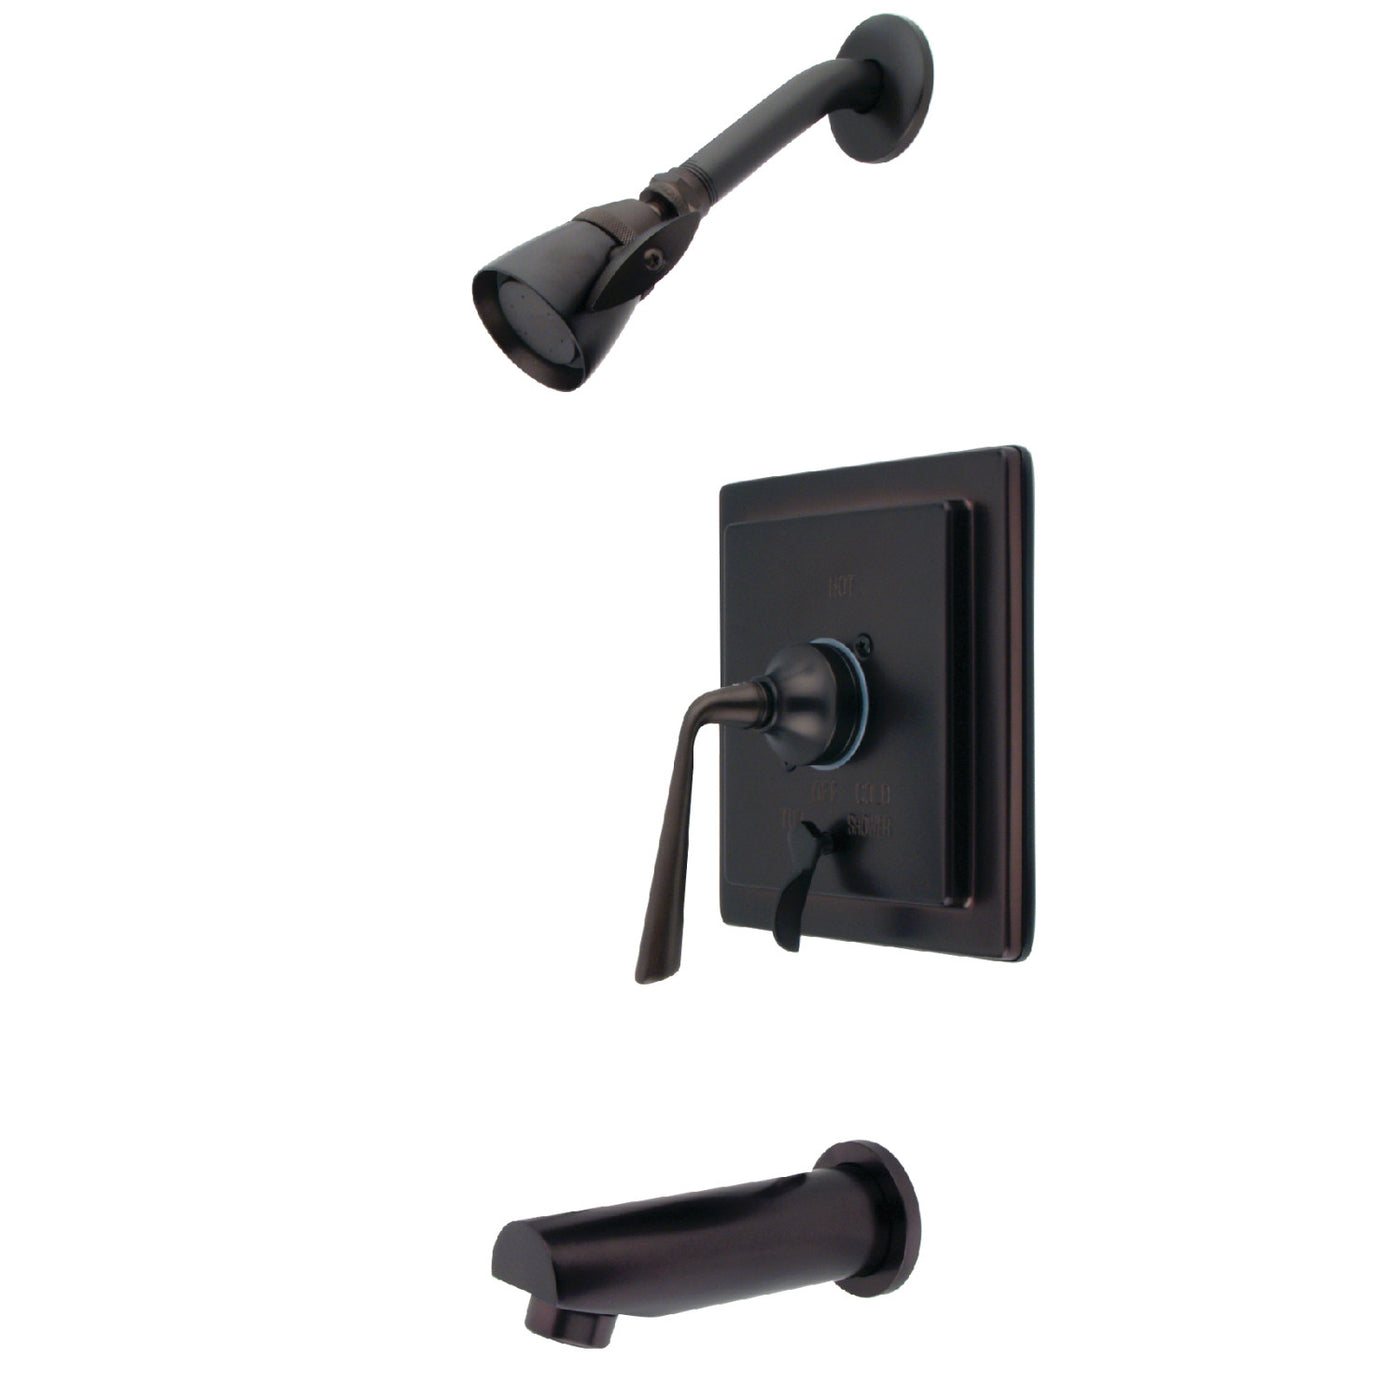 Elements of Design EB86550ZL Tub and Shower Faucet with Diverter, Oil Rubbed Bronze